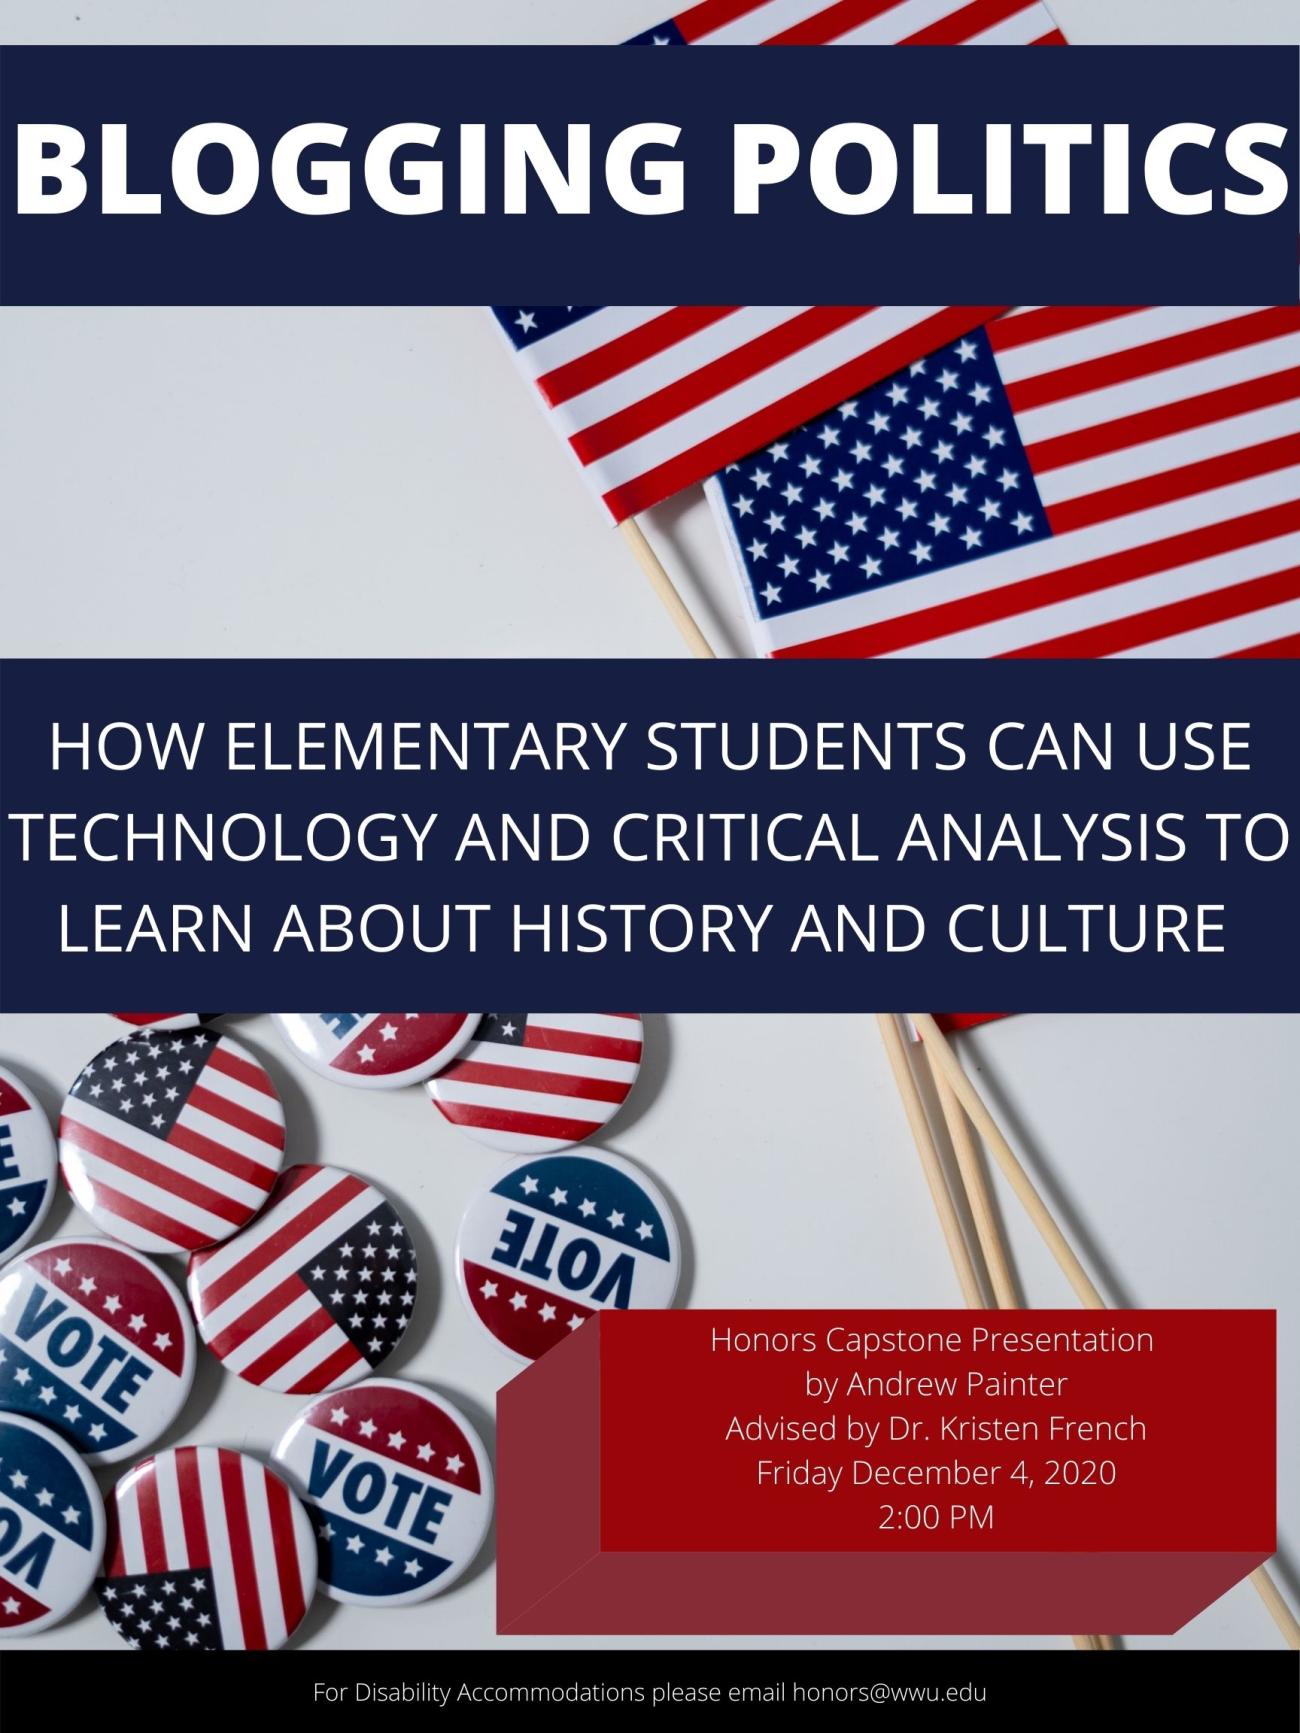 Image: American flags and patriotic buttons. Text: "Blogging Politics: How elementary students can use technology and critical analysis to learn about history and culture. Honors Capstone Presentation by Andrew Painter, Advised by Dr. Kristen French. Friday December 4, 2020, 2:00 PM. For Disability Accommodations, please email honors@wwu.edu"